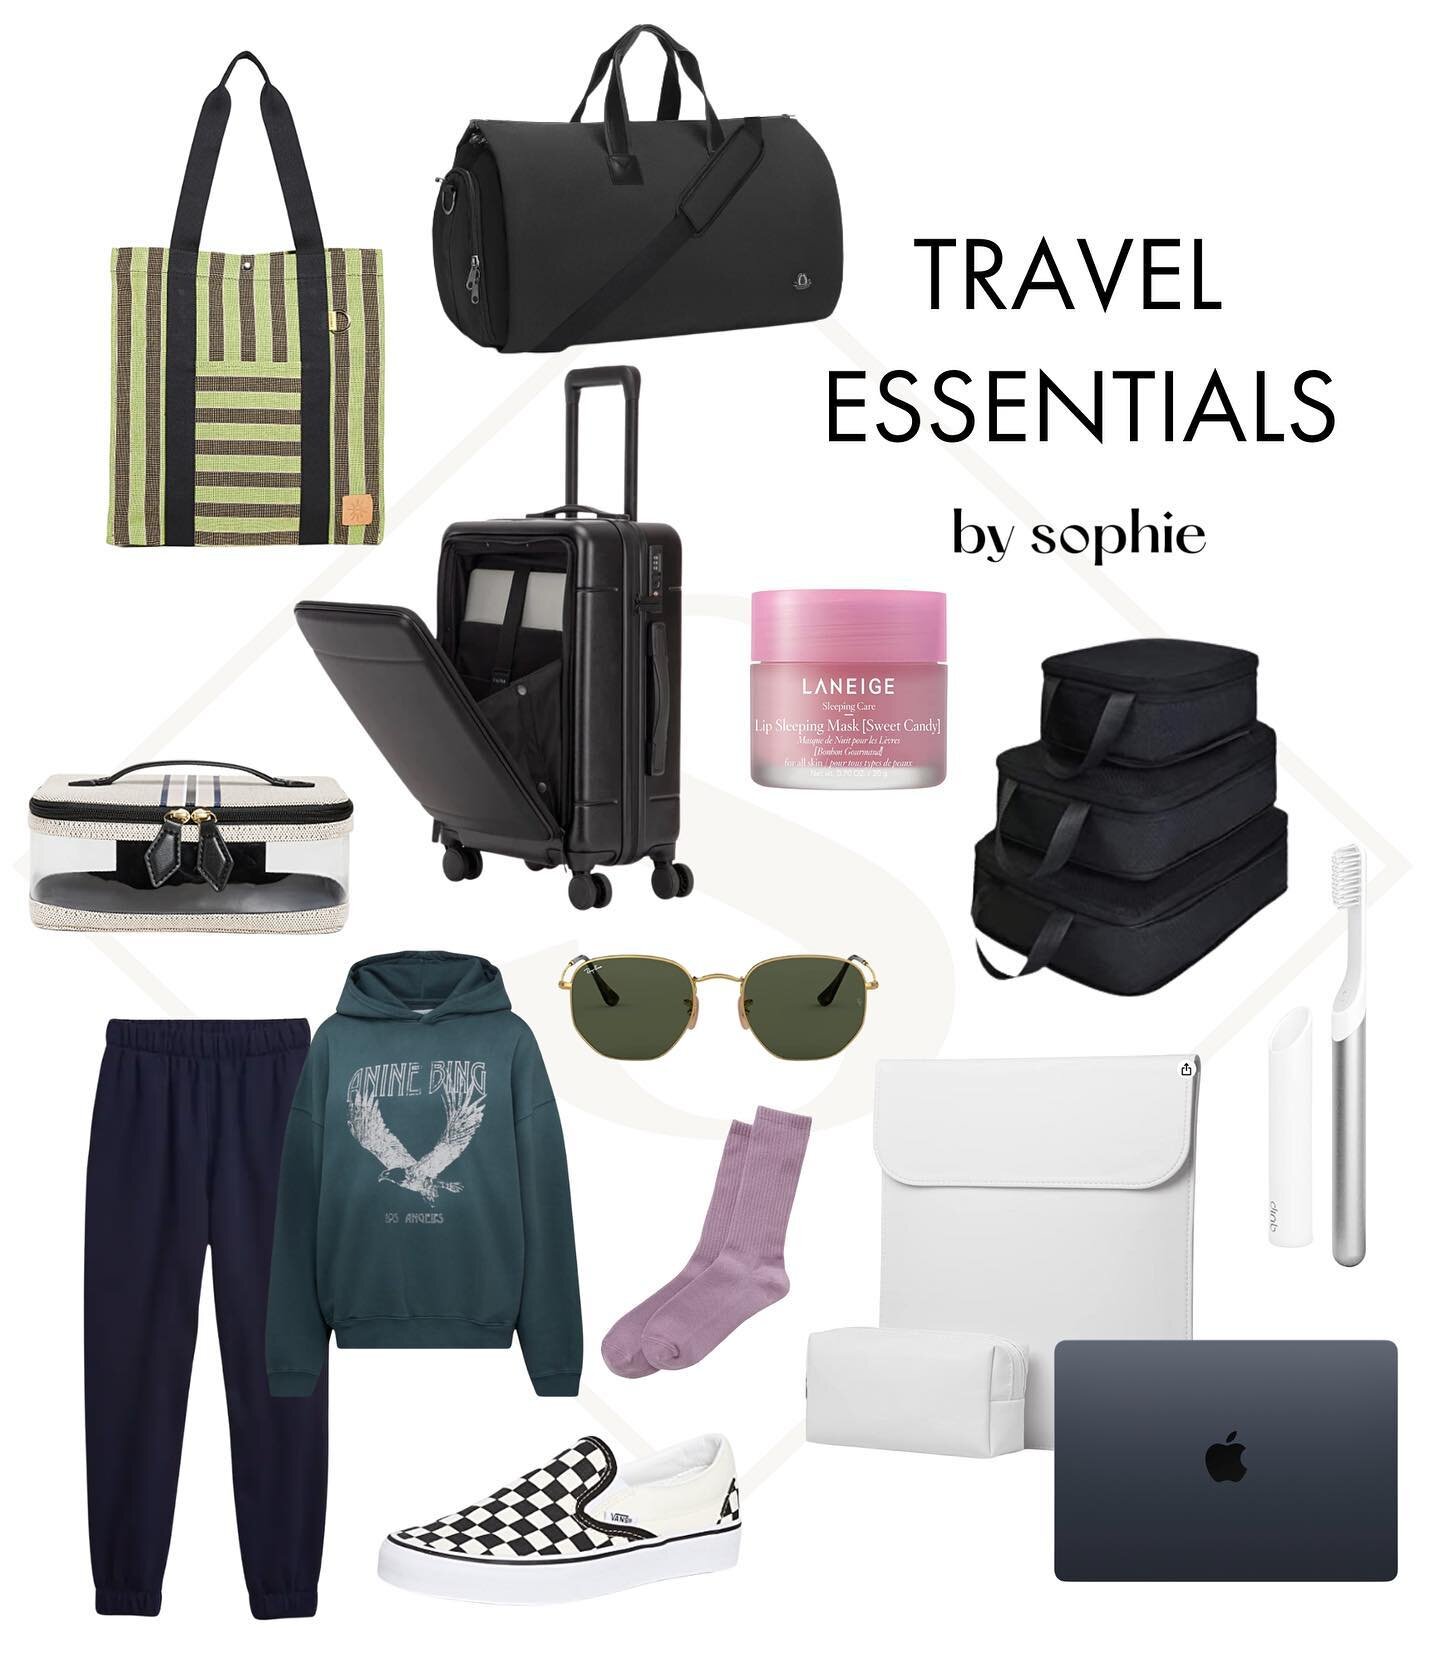 The right travel essentials make packing fun! Here are a few of my must-have travel items 🤗 Link in bio to shop!